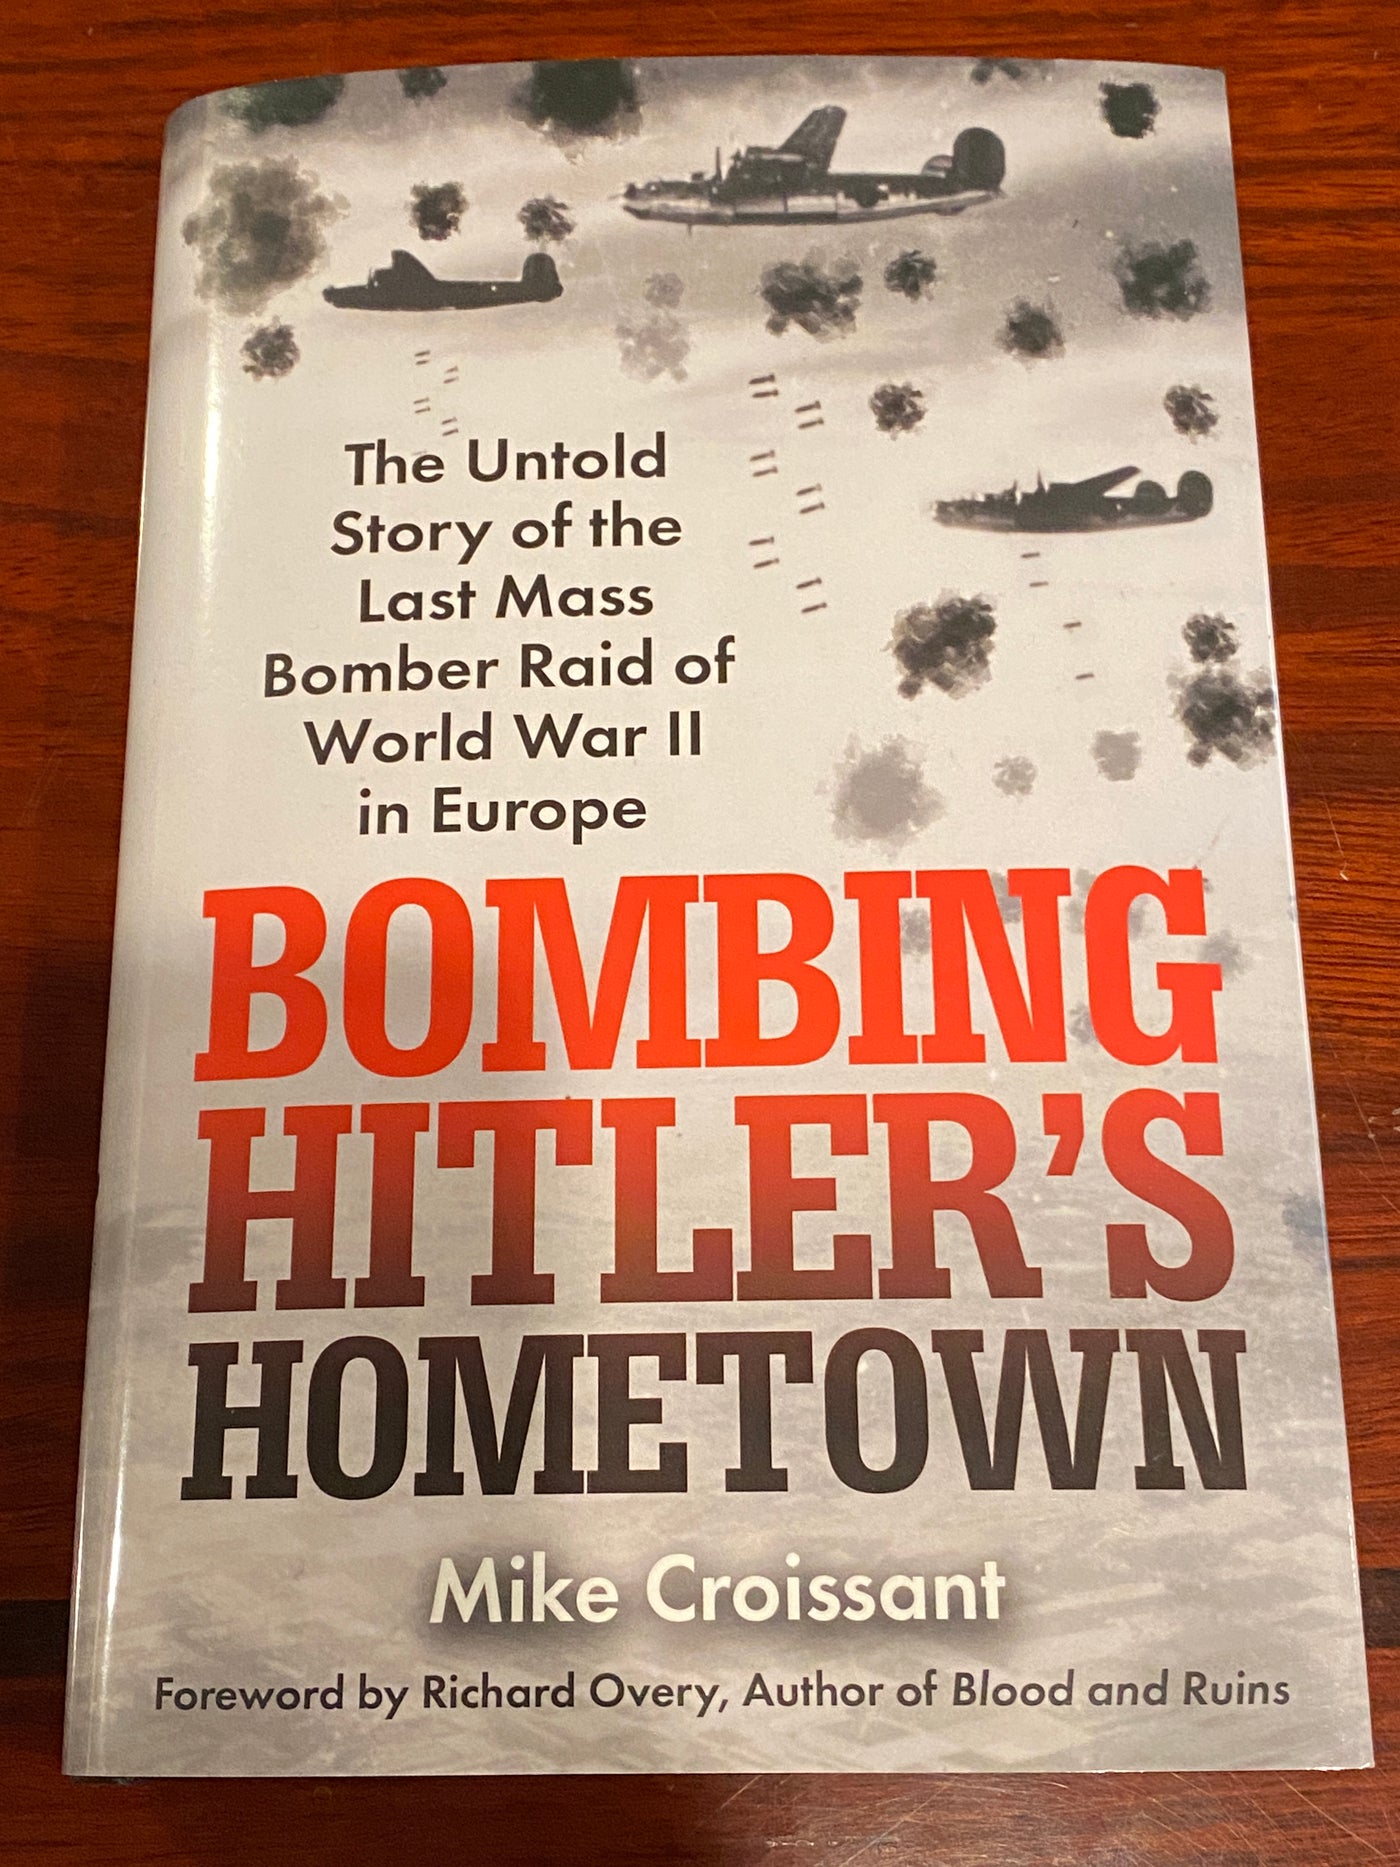 Bombing Hitler's Hometown by Mike Croissant